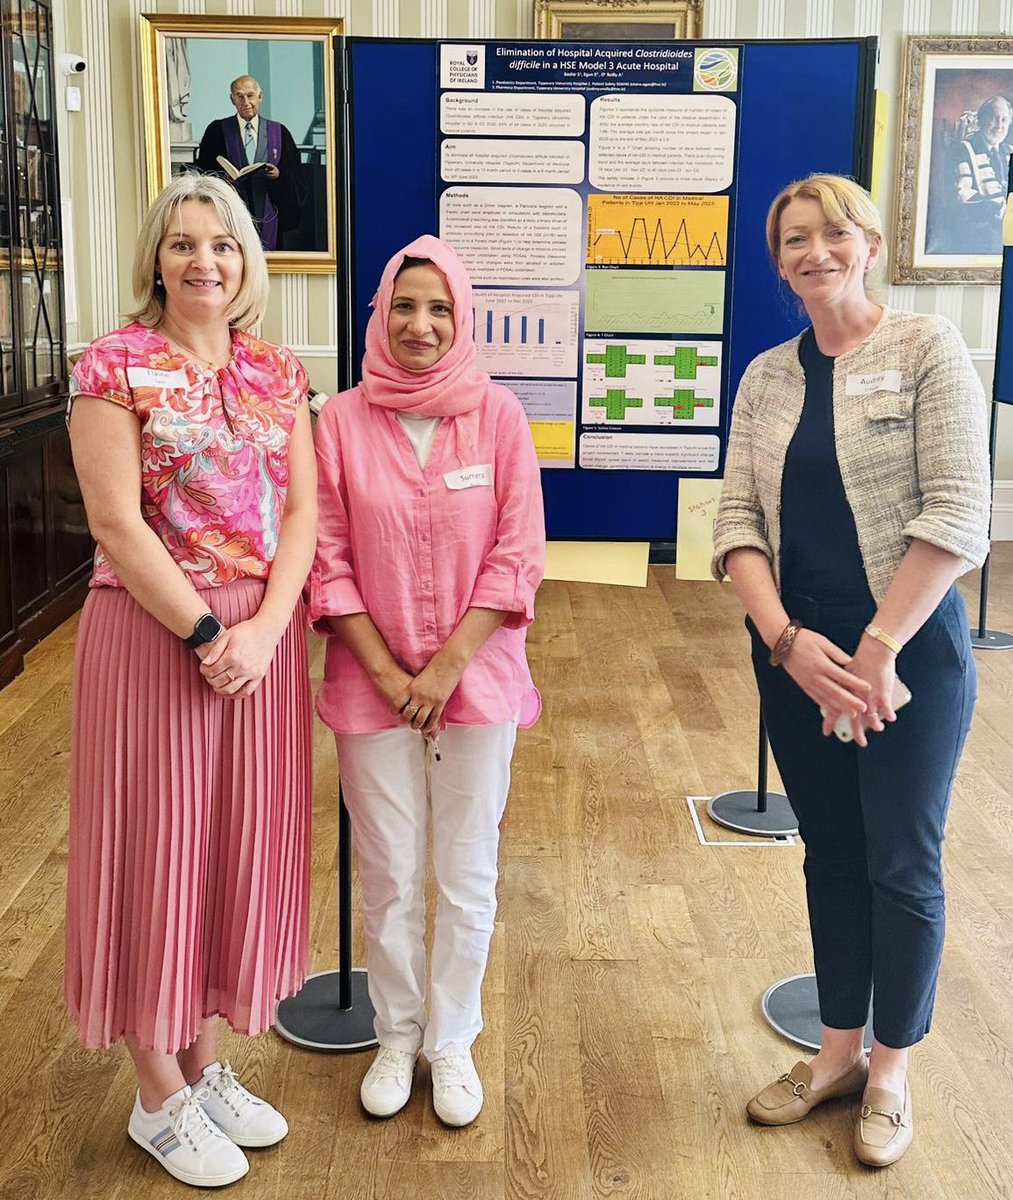 Tipperary University Hospital C diff Quality Improvement team presenting at RCPI #patientsafety Improved Antimicrobial management #medicationsafety @TippUHnursing @HrSswhg